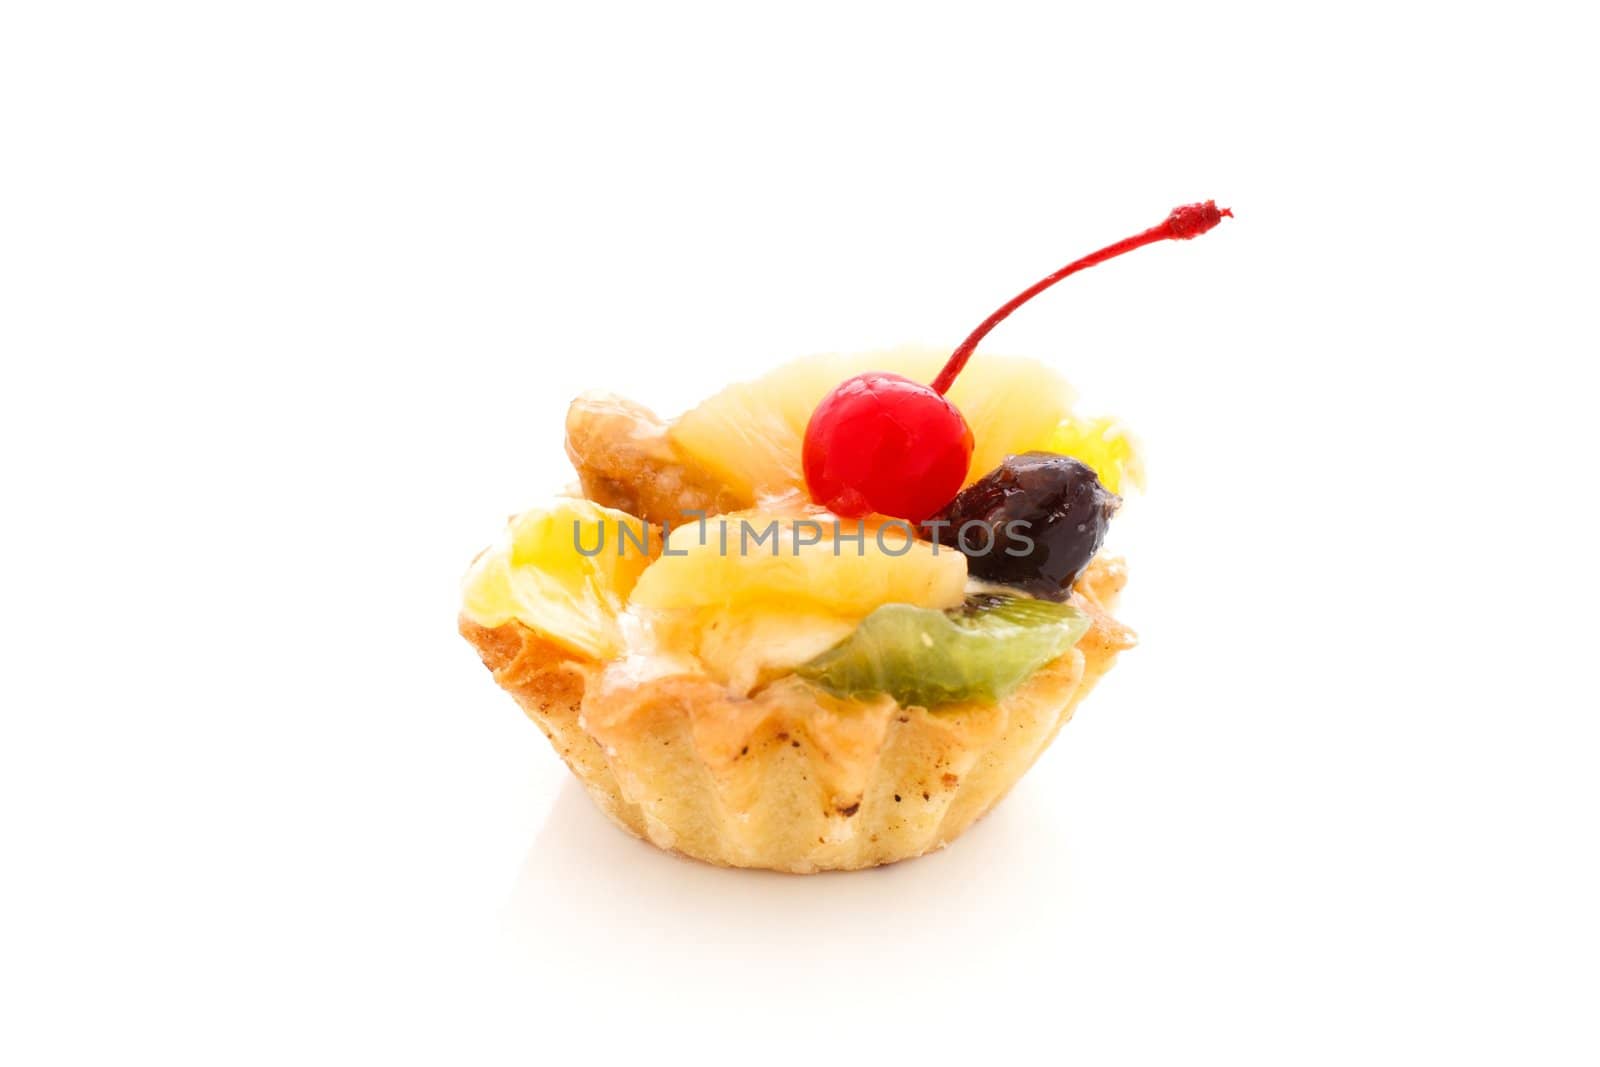 An image of a cake with cherry on top. On white background.